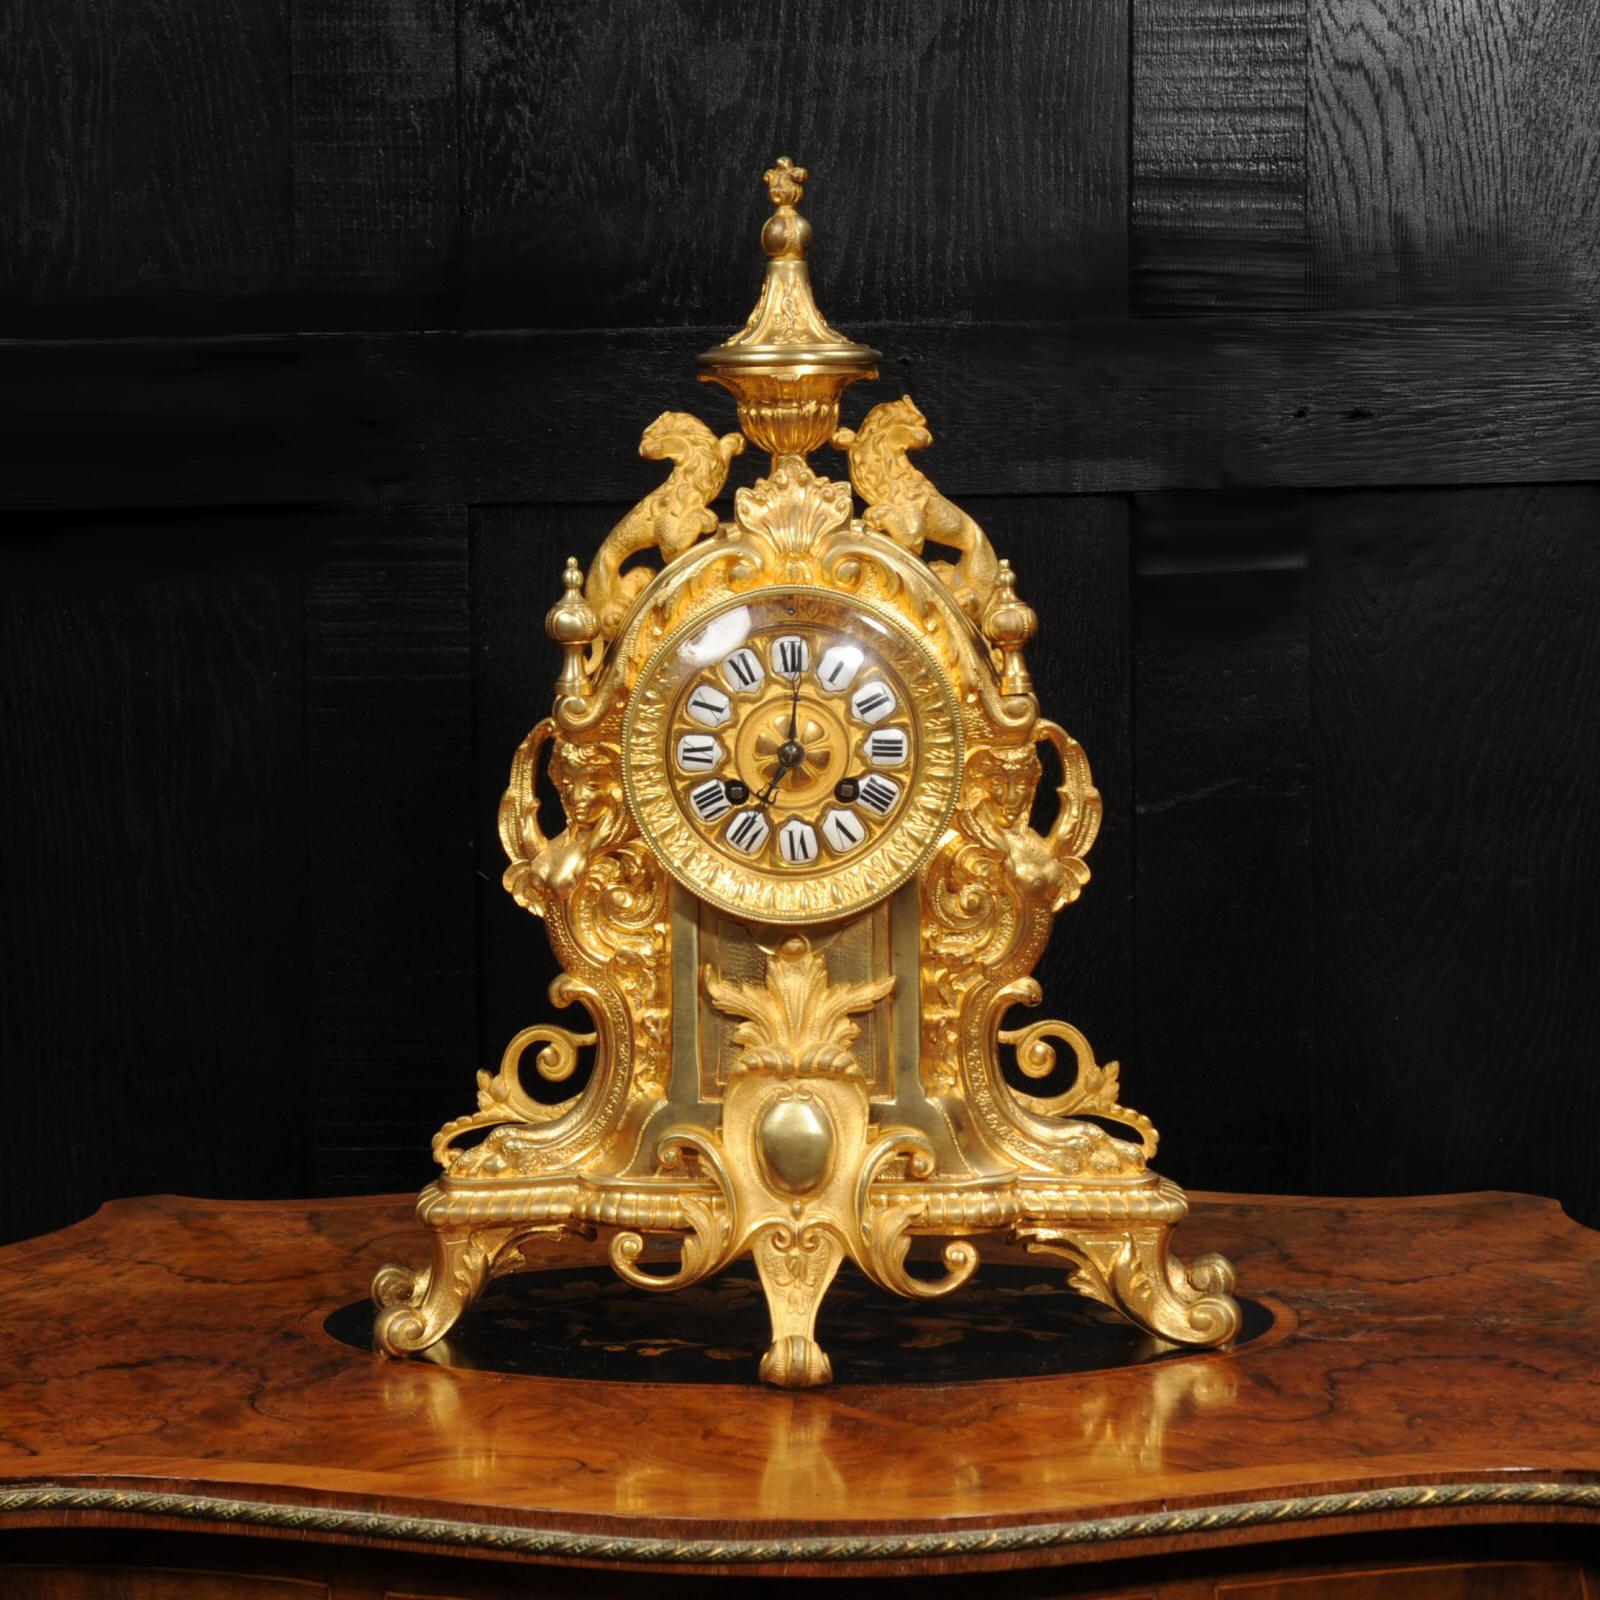 A beautiful antique French clock. Its is finely modelled in ormolu (finely gilded bronze) and features two lions to each side of an urn to the top. To each side of the dial are exquisite winged goddesses formed into the side of the case. The